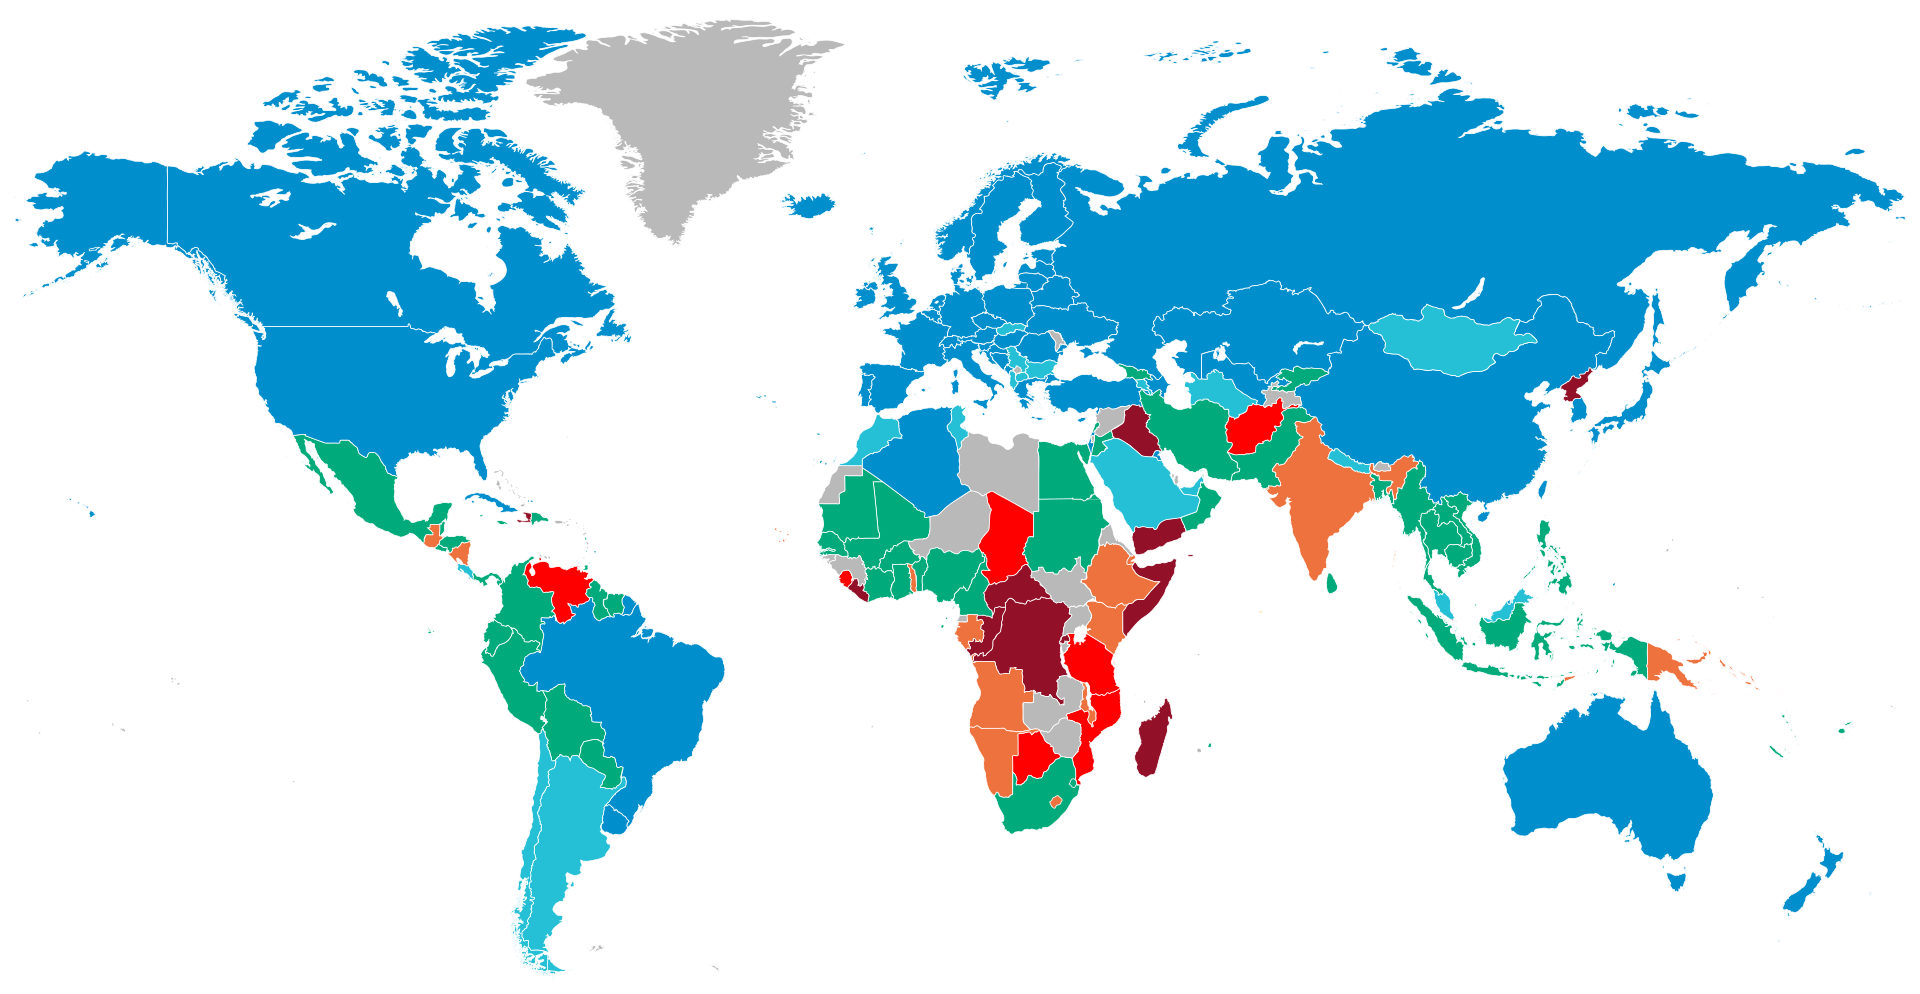 The percentage of population suffering from hunger in 2021 according to the World Food Programme with blue being the lowest and dark red the highest percentage. 